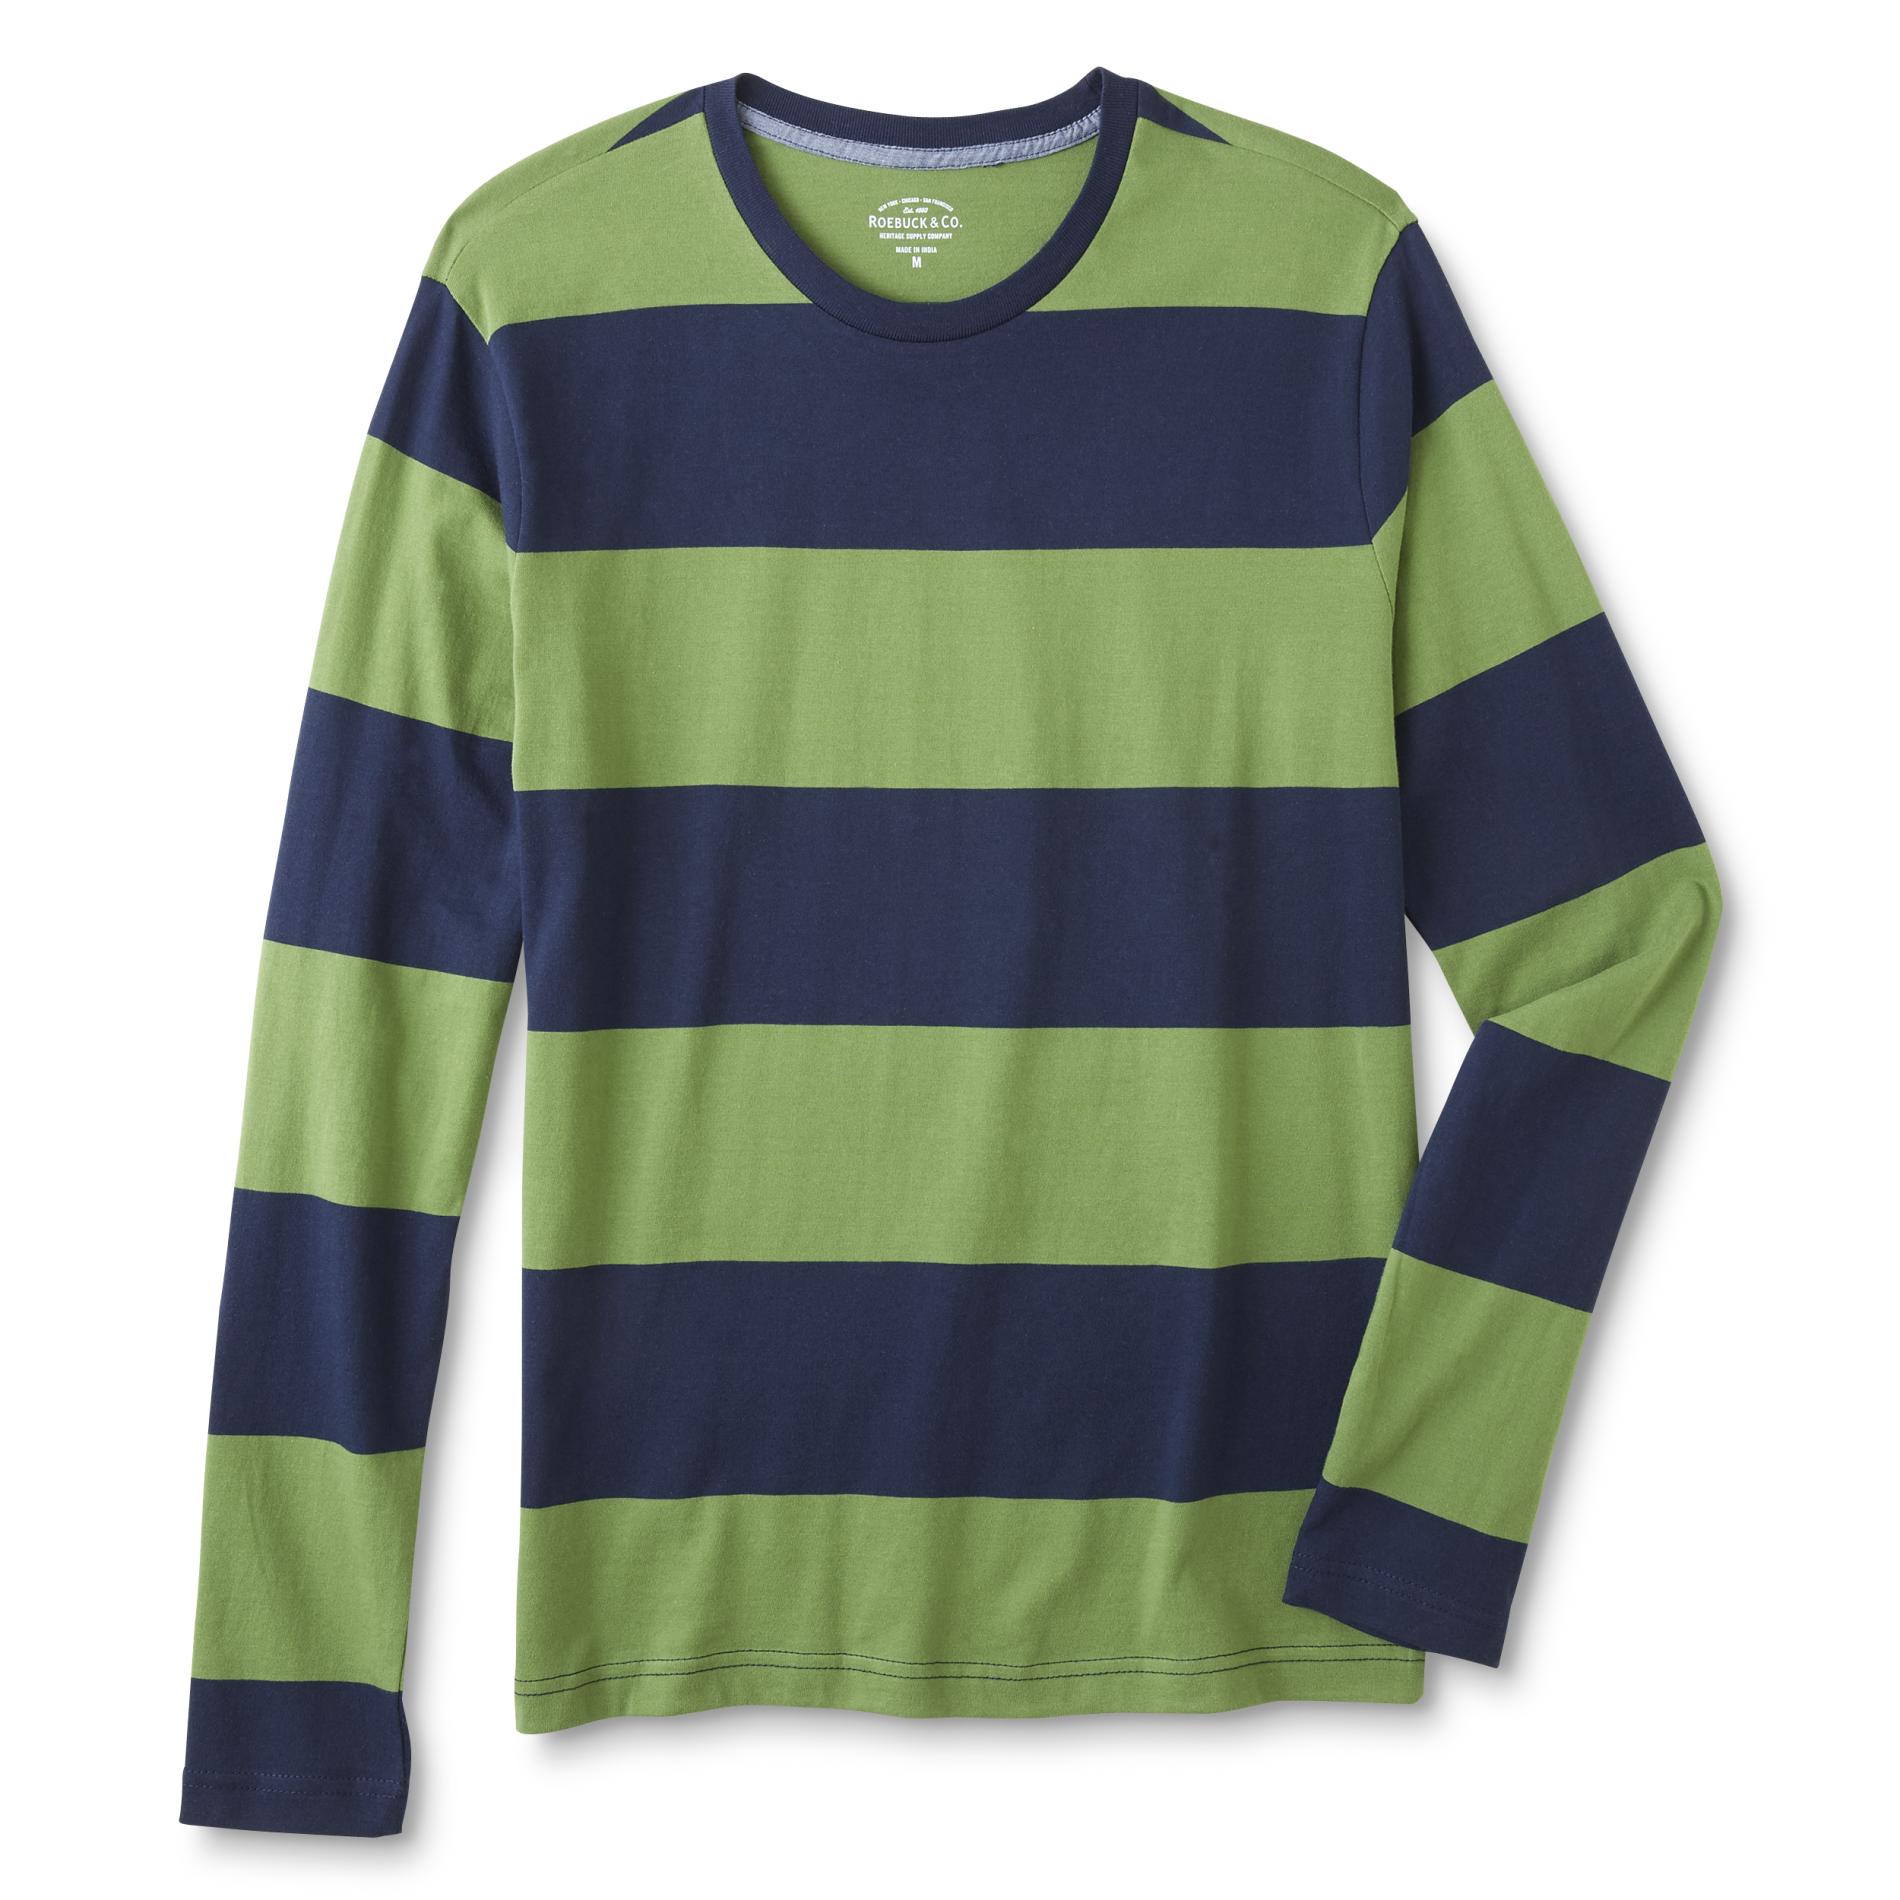 Roebuck & Co. Young Men's Long-Sleeve T-Shirt - Rugby Striped